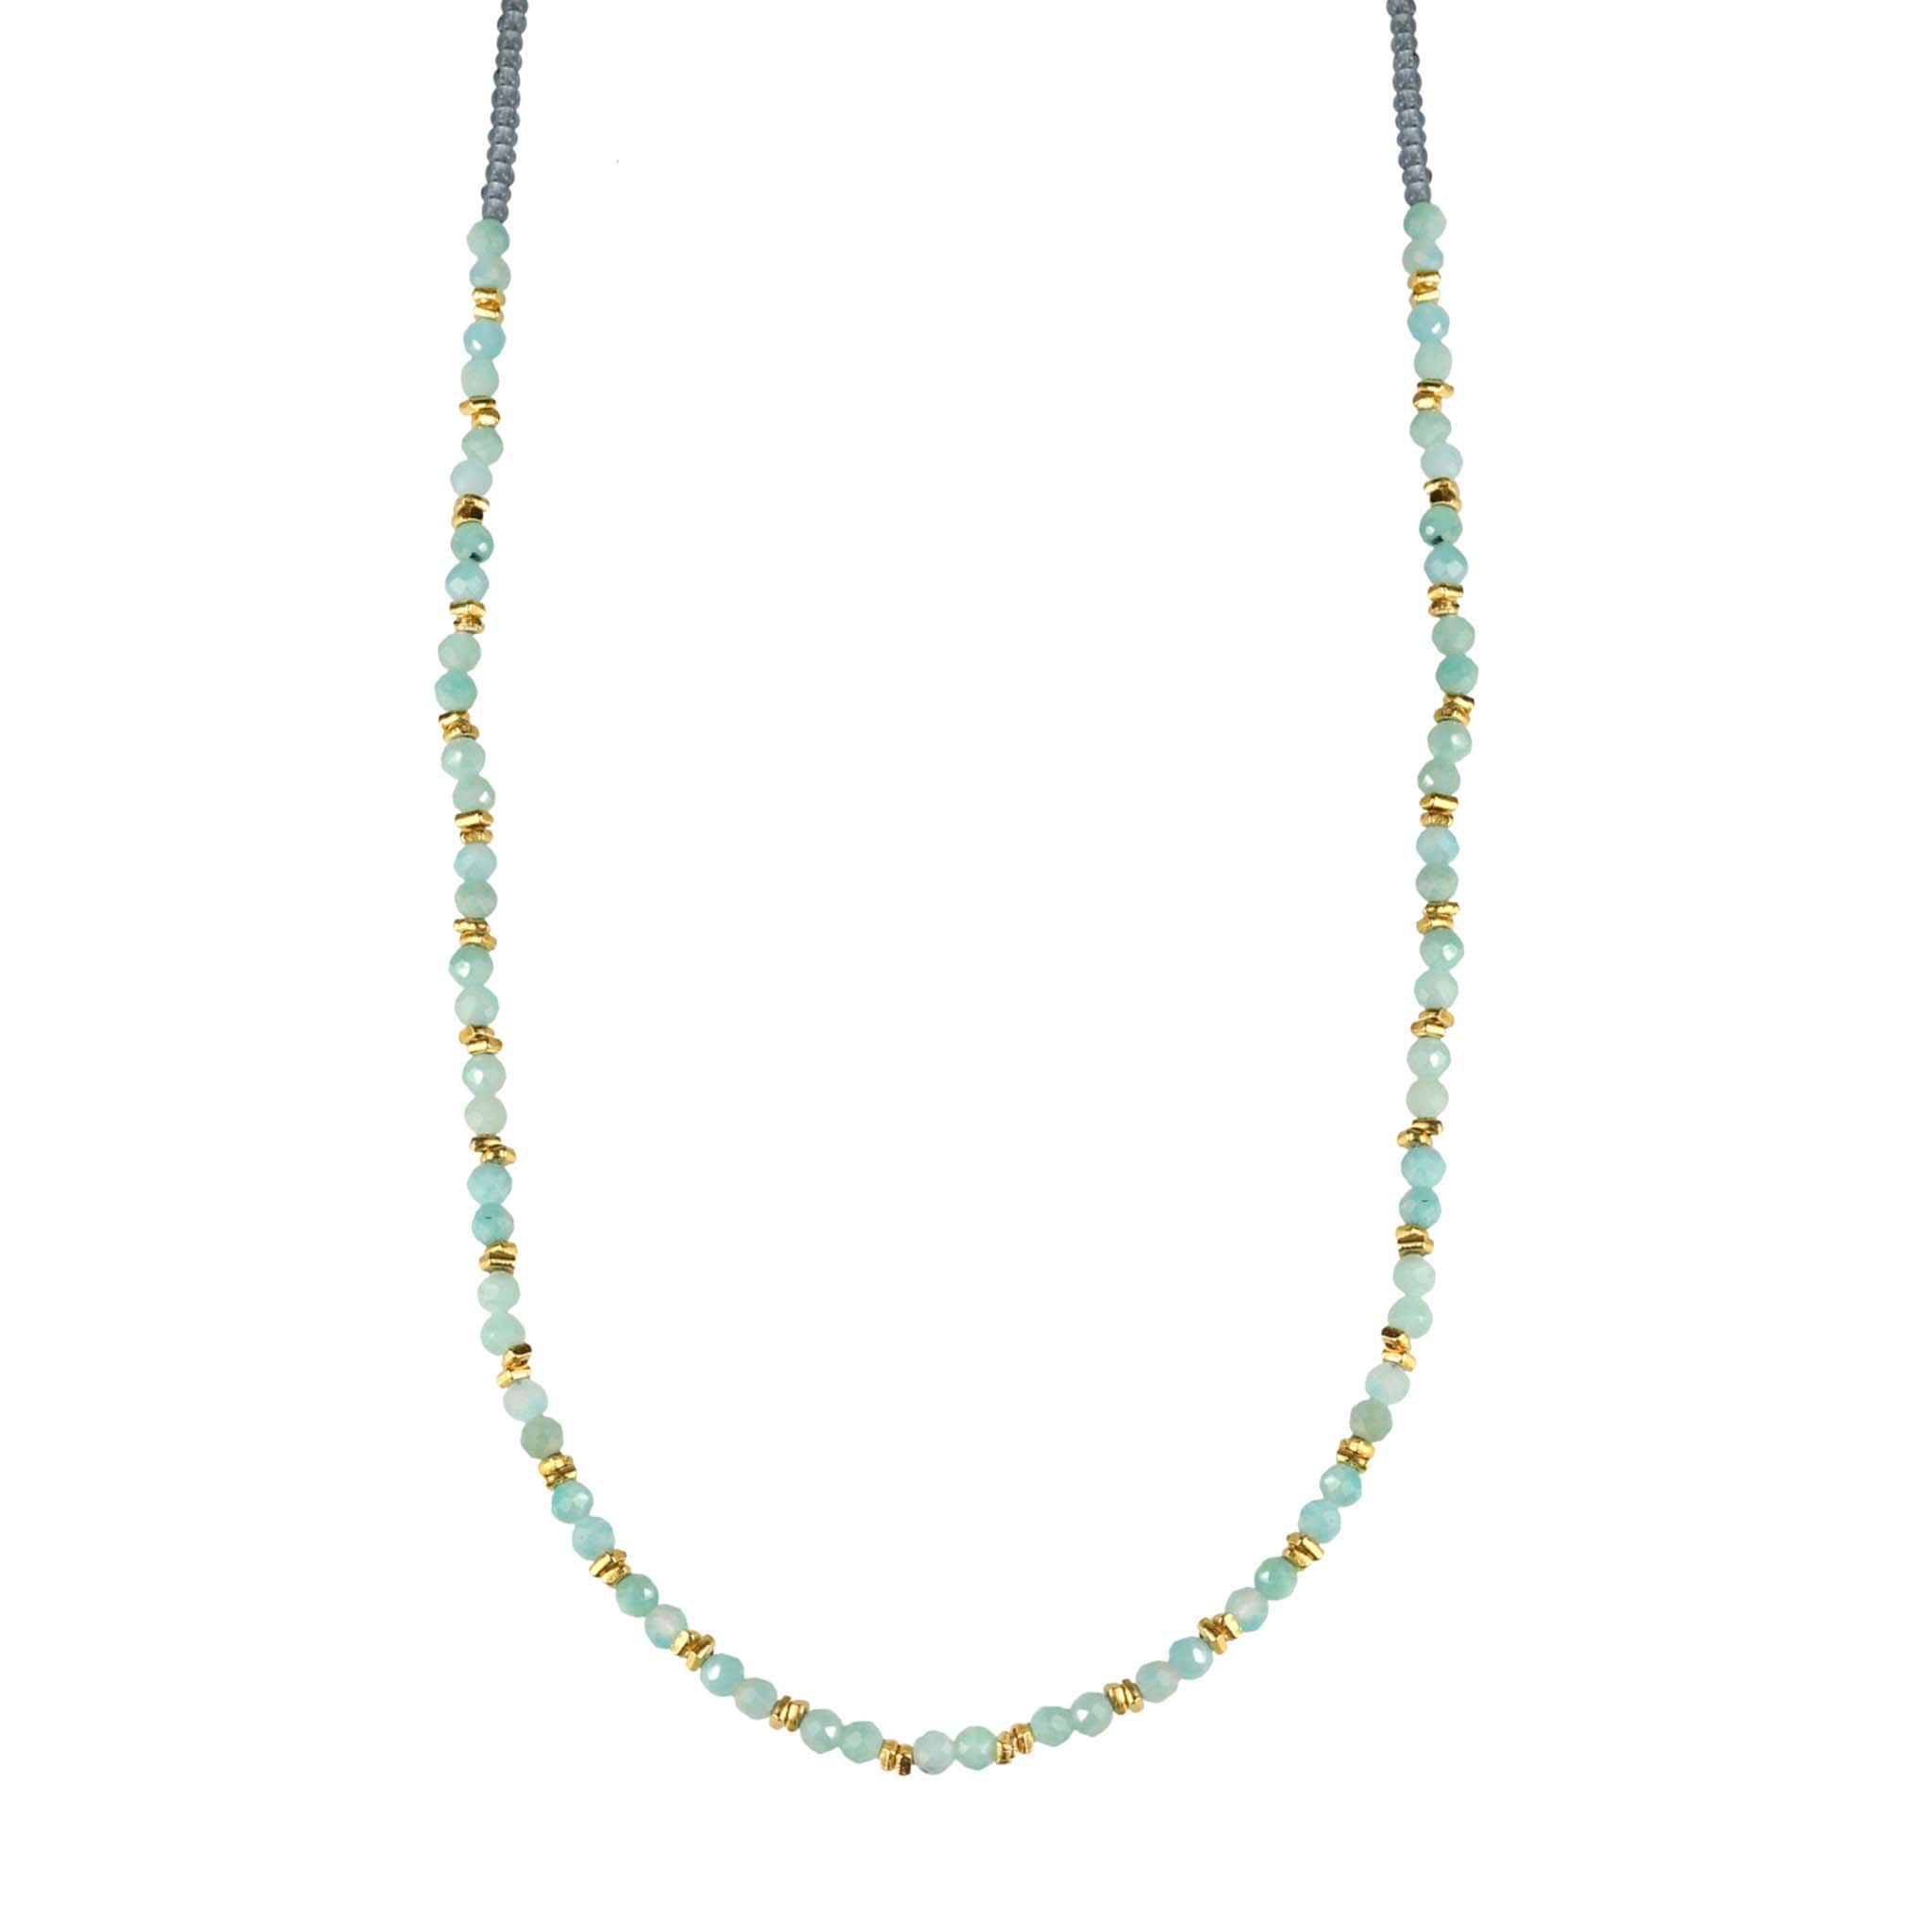 Debbie Fisher Grey Seed Bead Necklace with Amazonite and Gold Vermeil Station